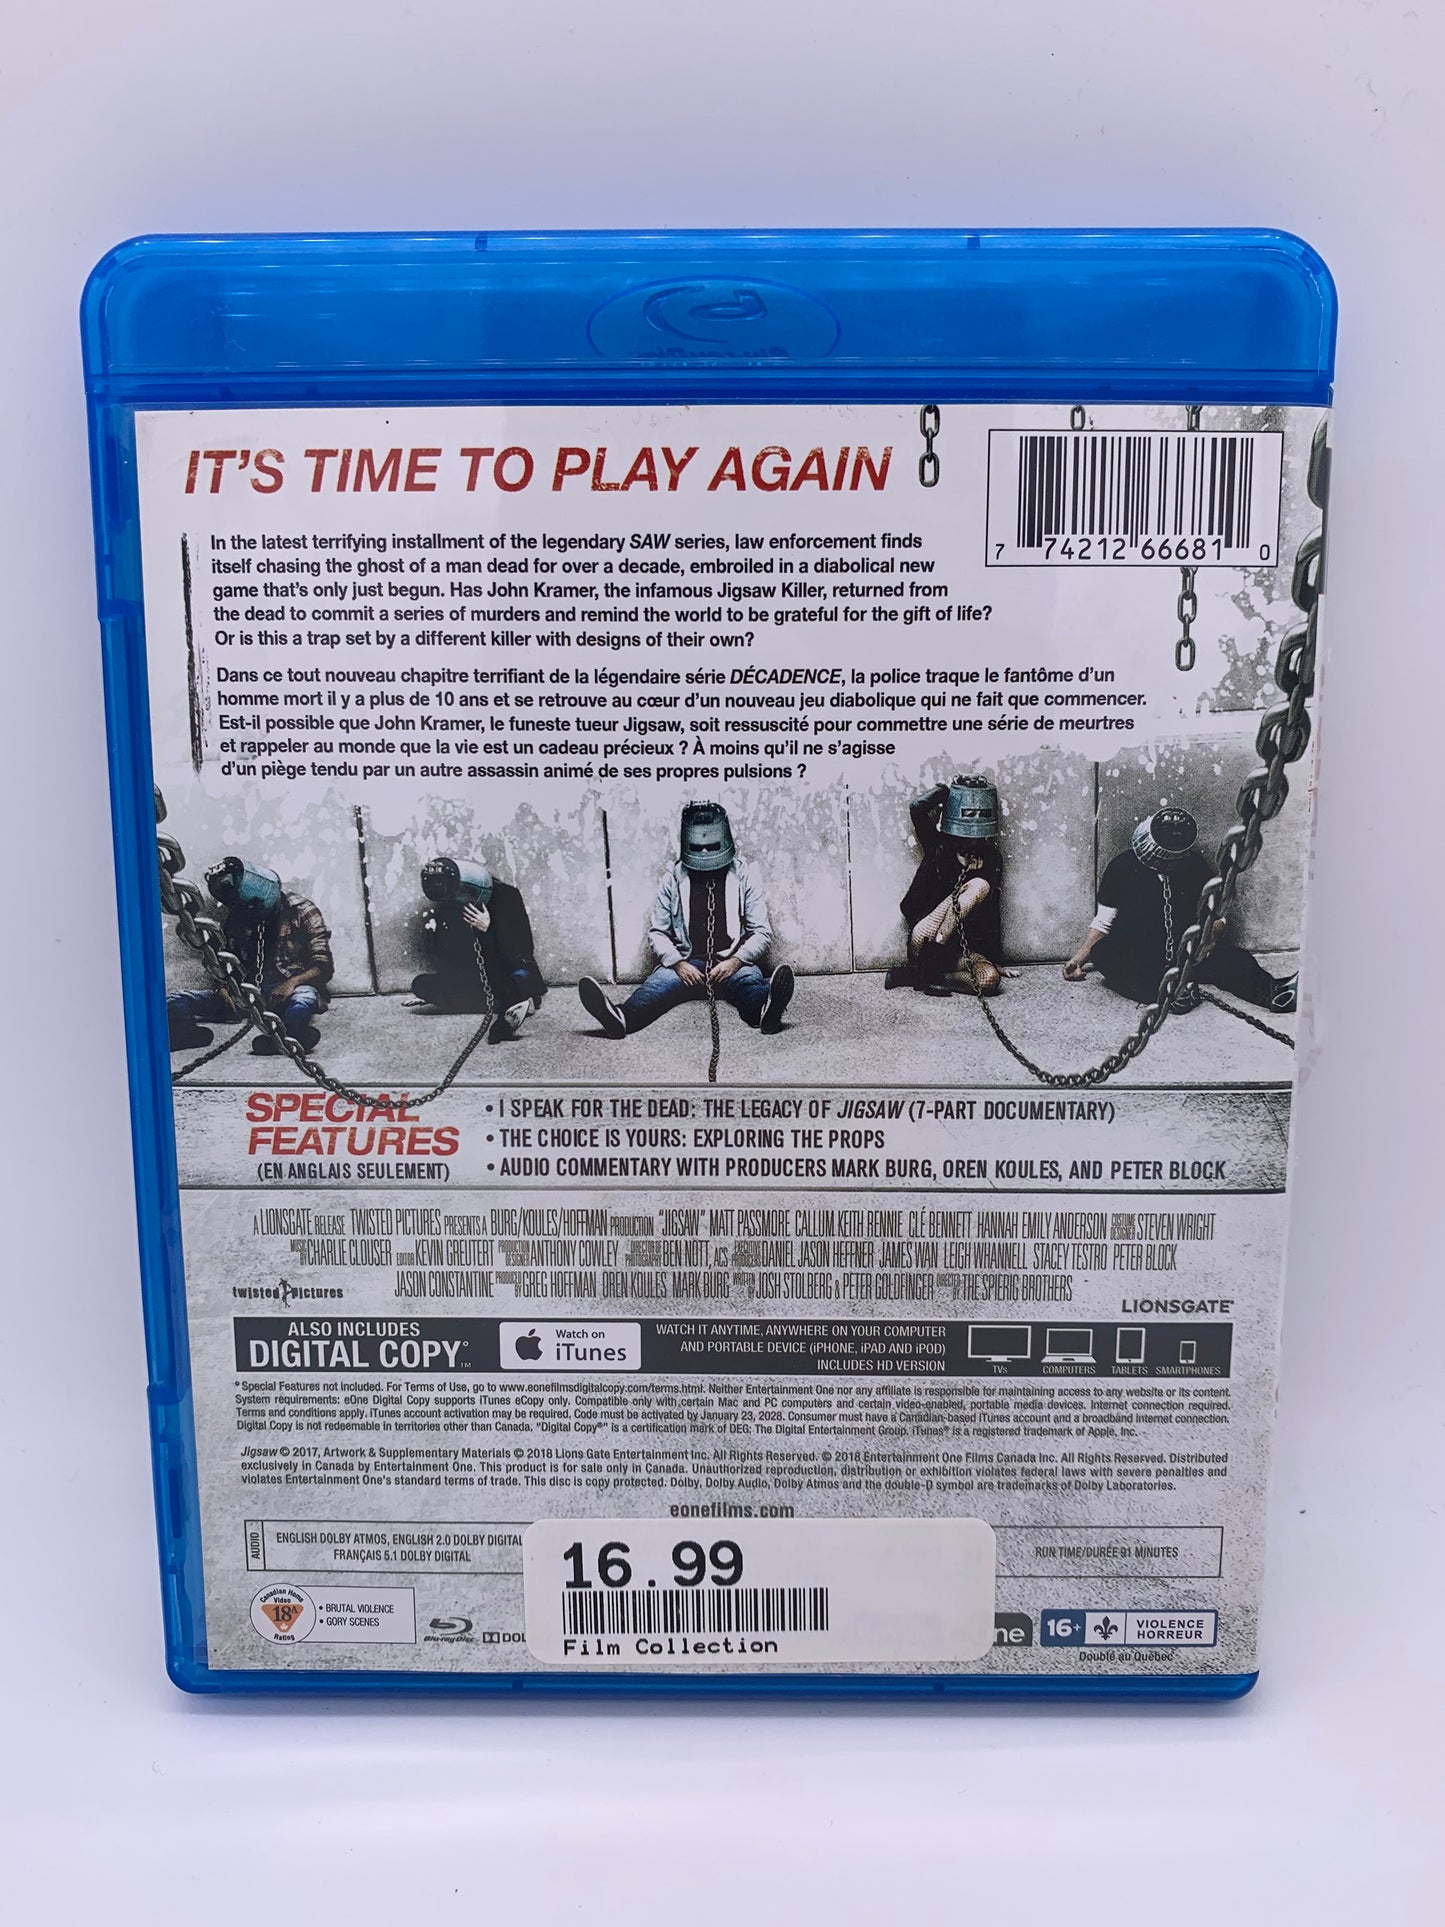 BLU-RAY FILM | DECADANCE THE LEGACY [JiGSAW THE GAME CONTINUES]